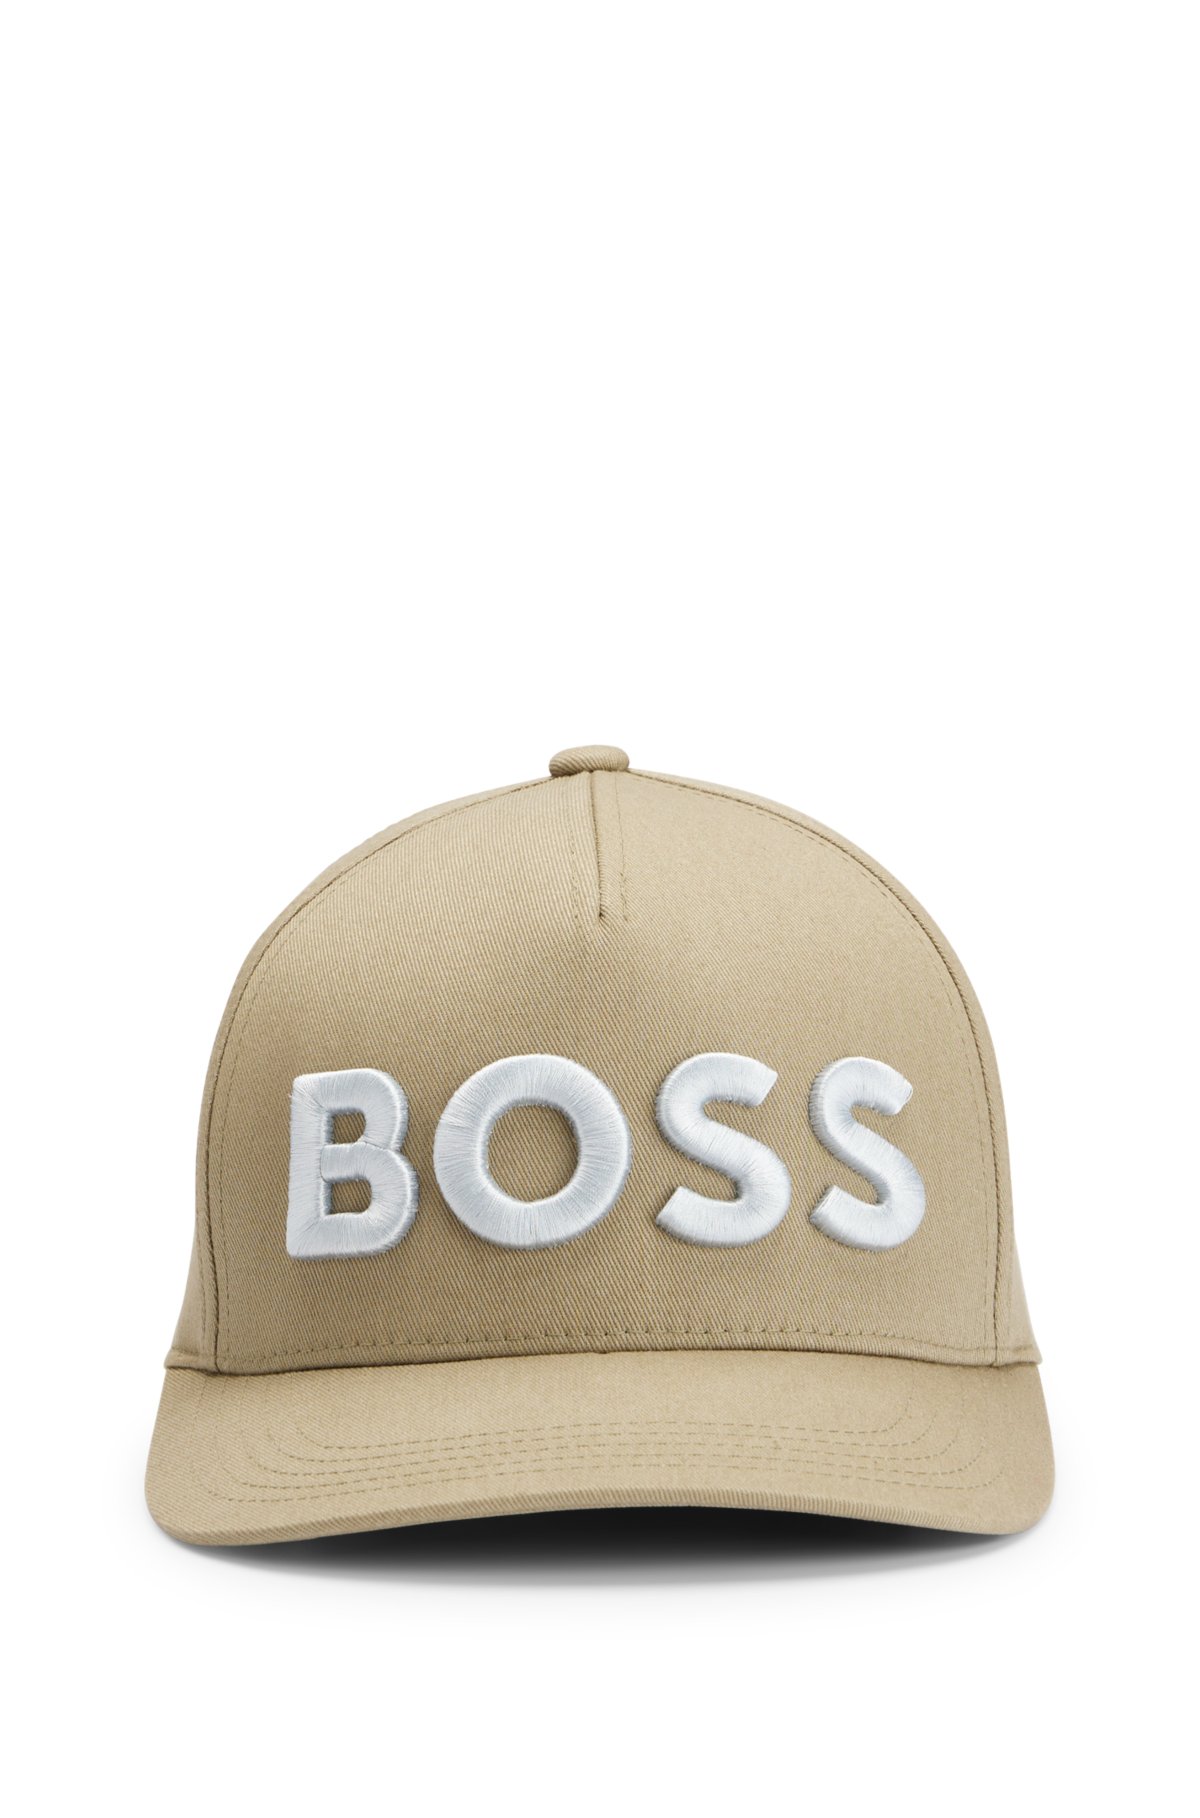 strap BOSS cap and adjustable logo - Cotton-twill with embroidered